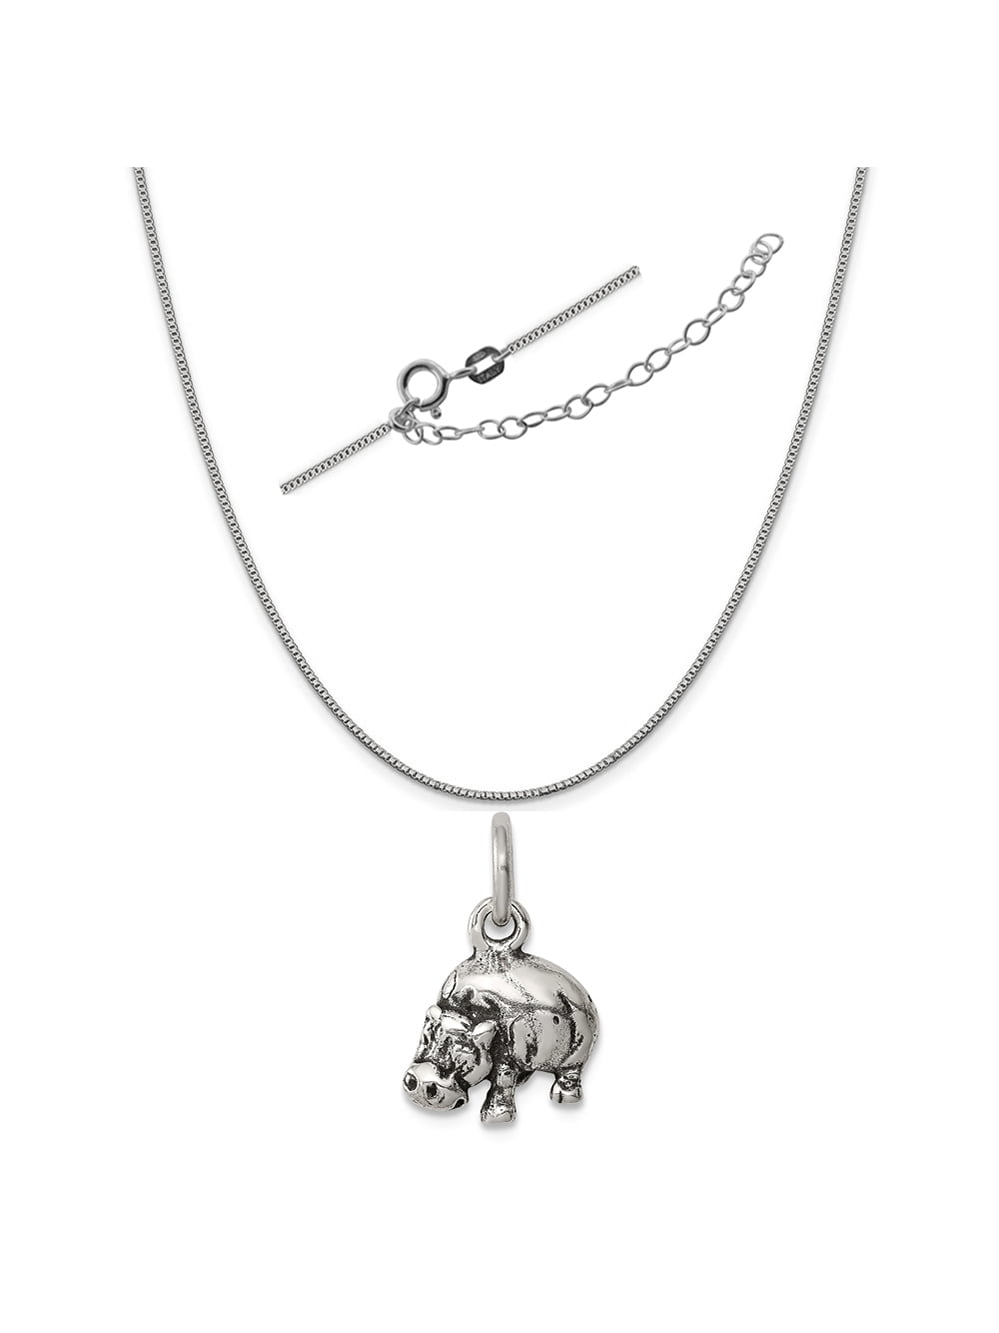 Sterling silver TJ girl jump rope charm on a sterling chain.